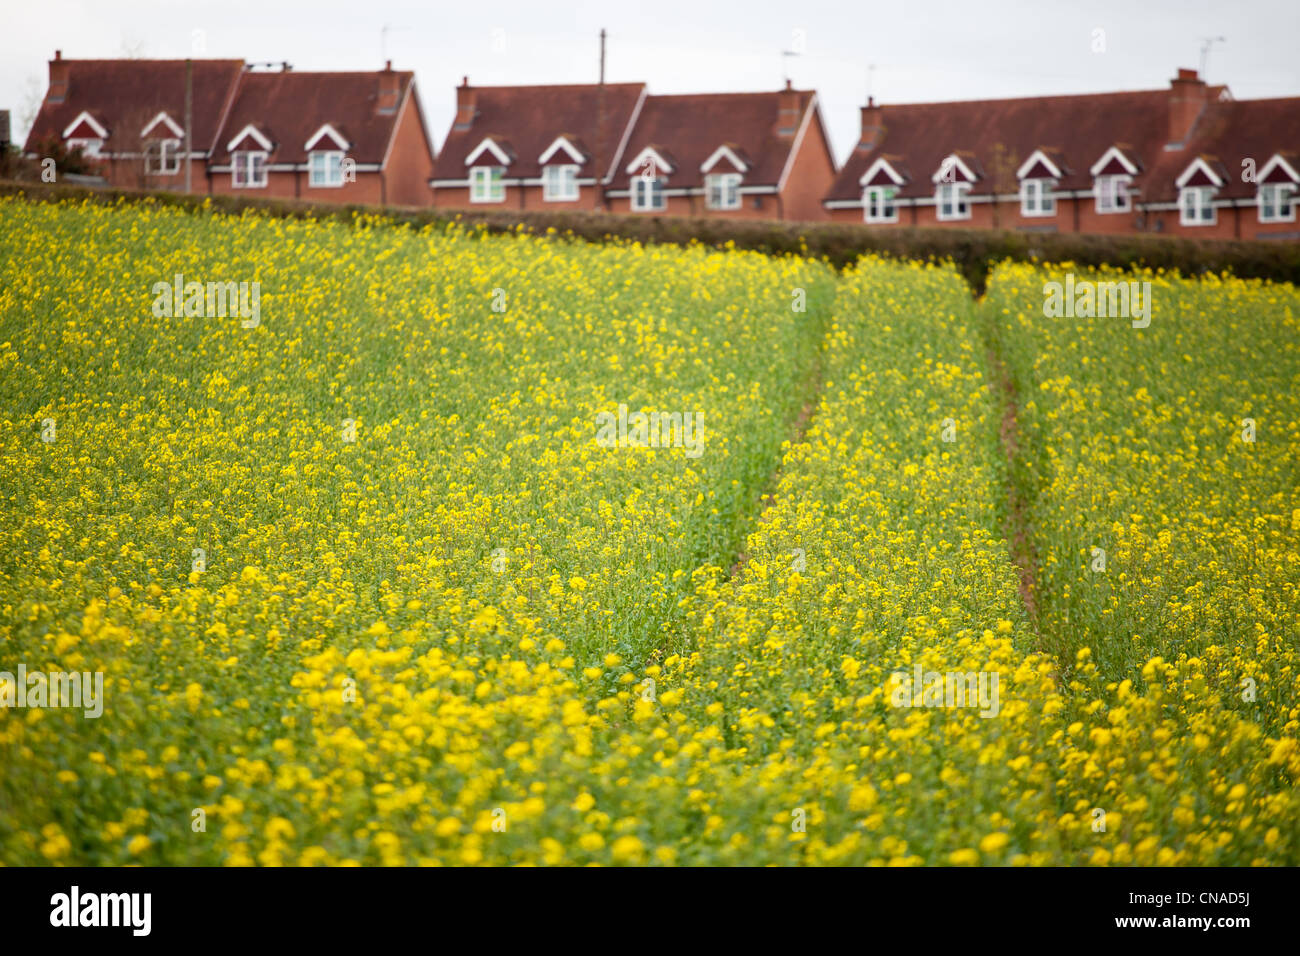 rapeseed field in Suckley,Worcestershire,England,shallow depth of field showing modern housing Stock Photo